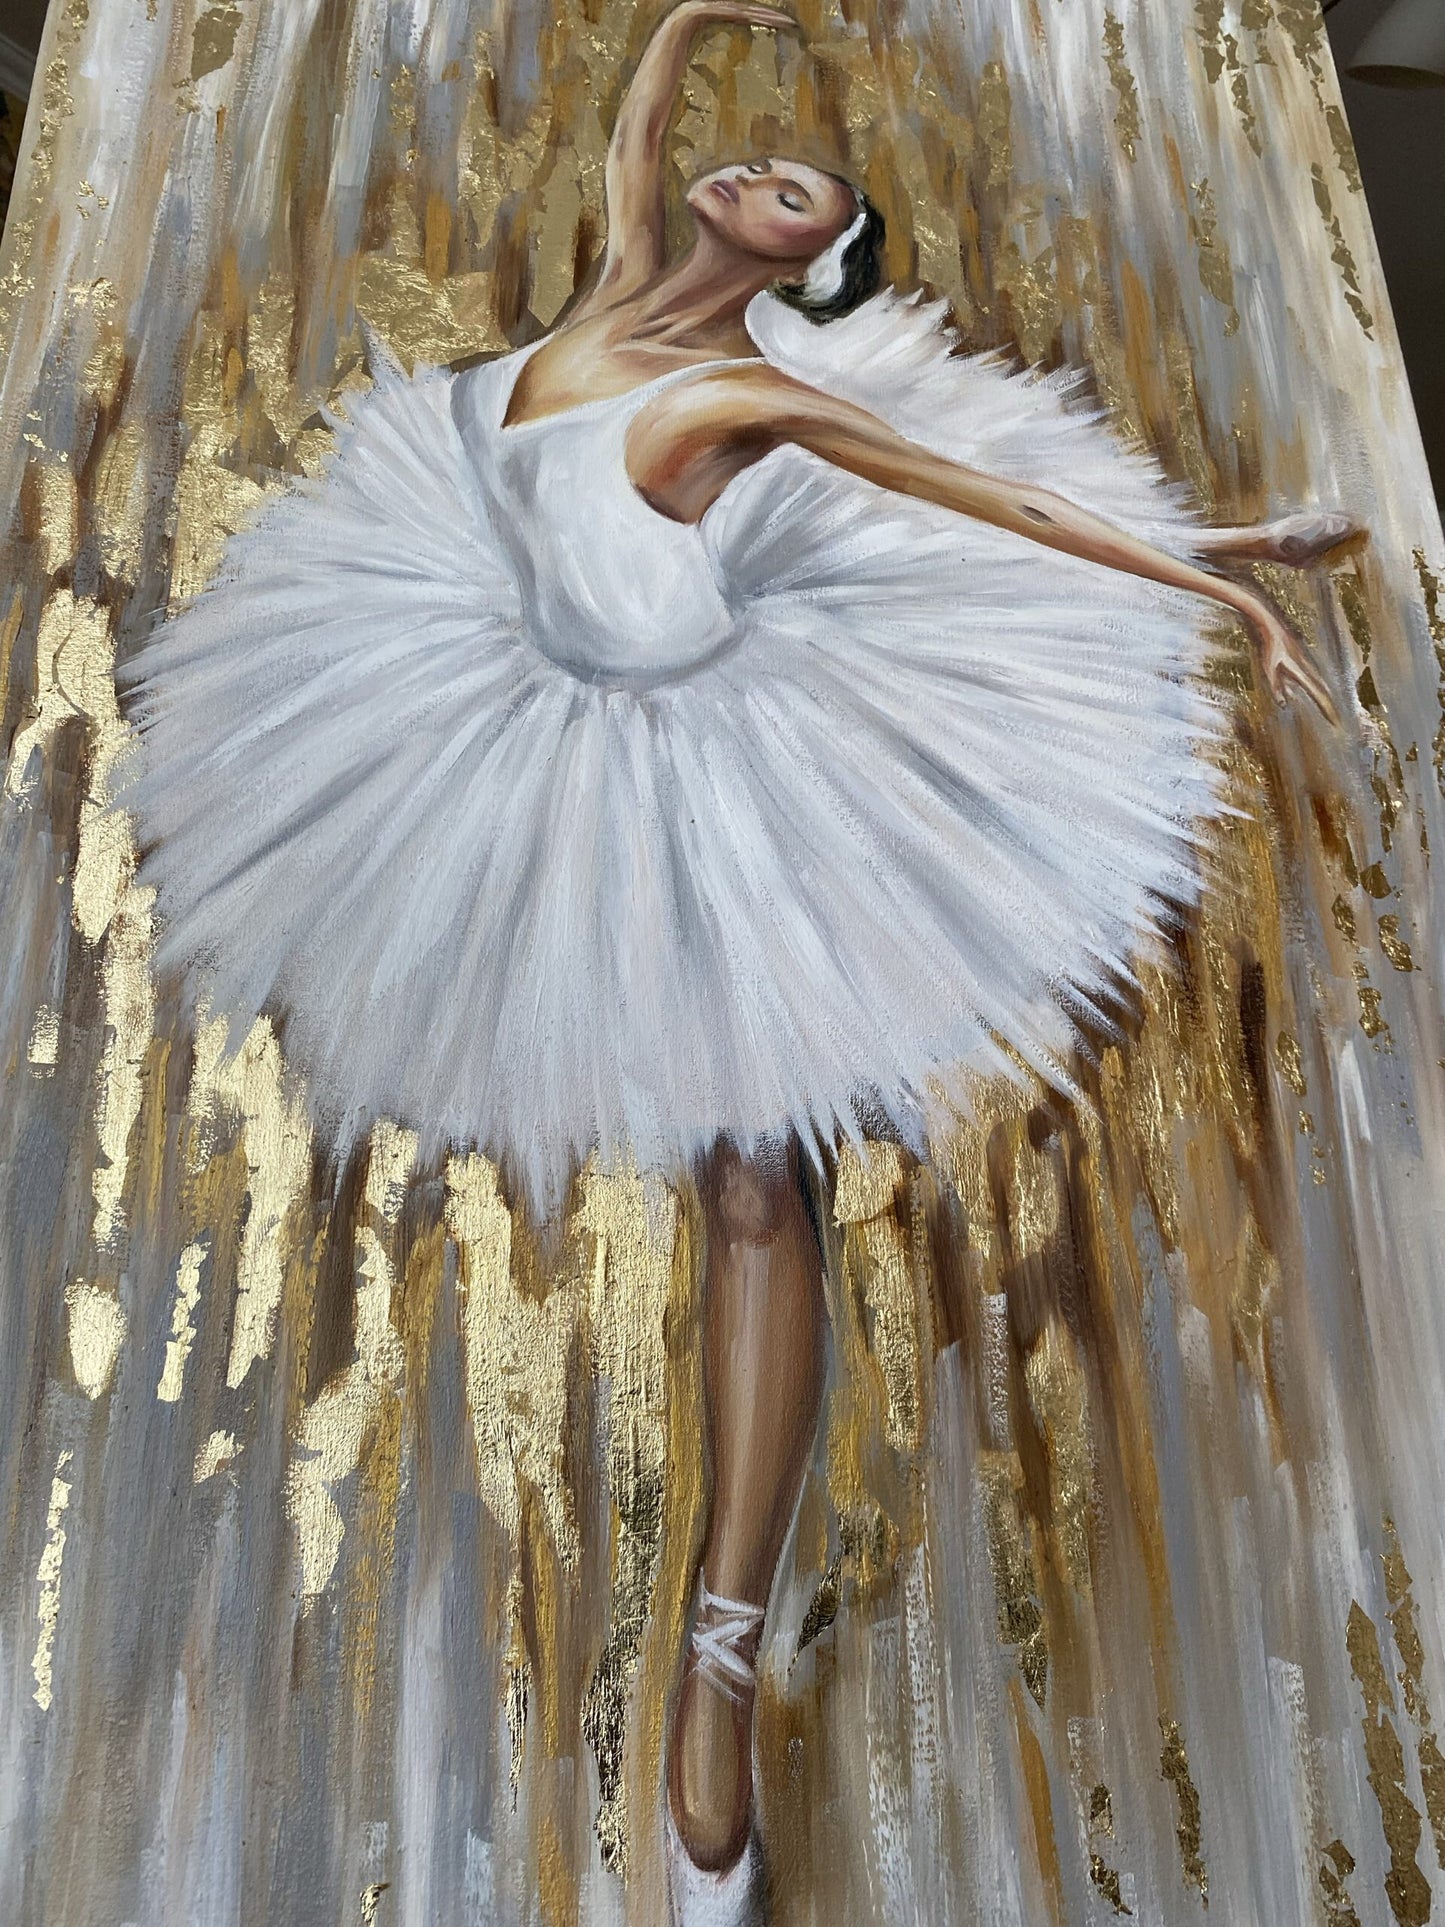 Dancing Ballerina Oil Painting with Gold Leaf Abstract Background Ballet Dancer Wall Art Dancing Girl Painting on Canvas